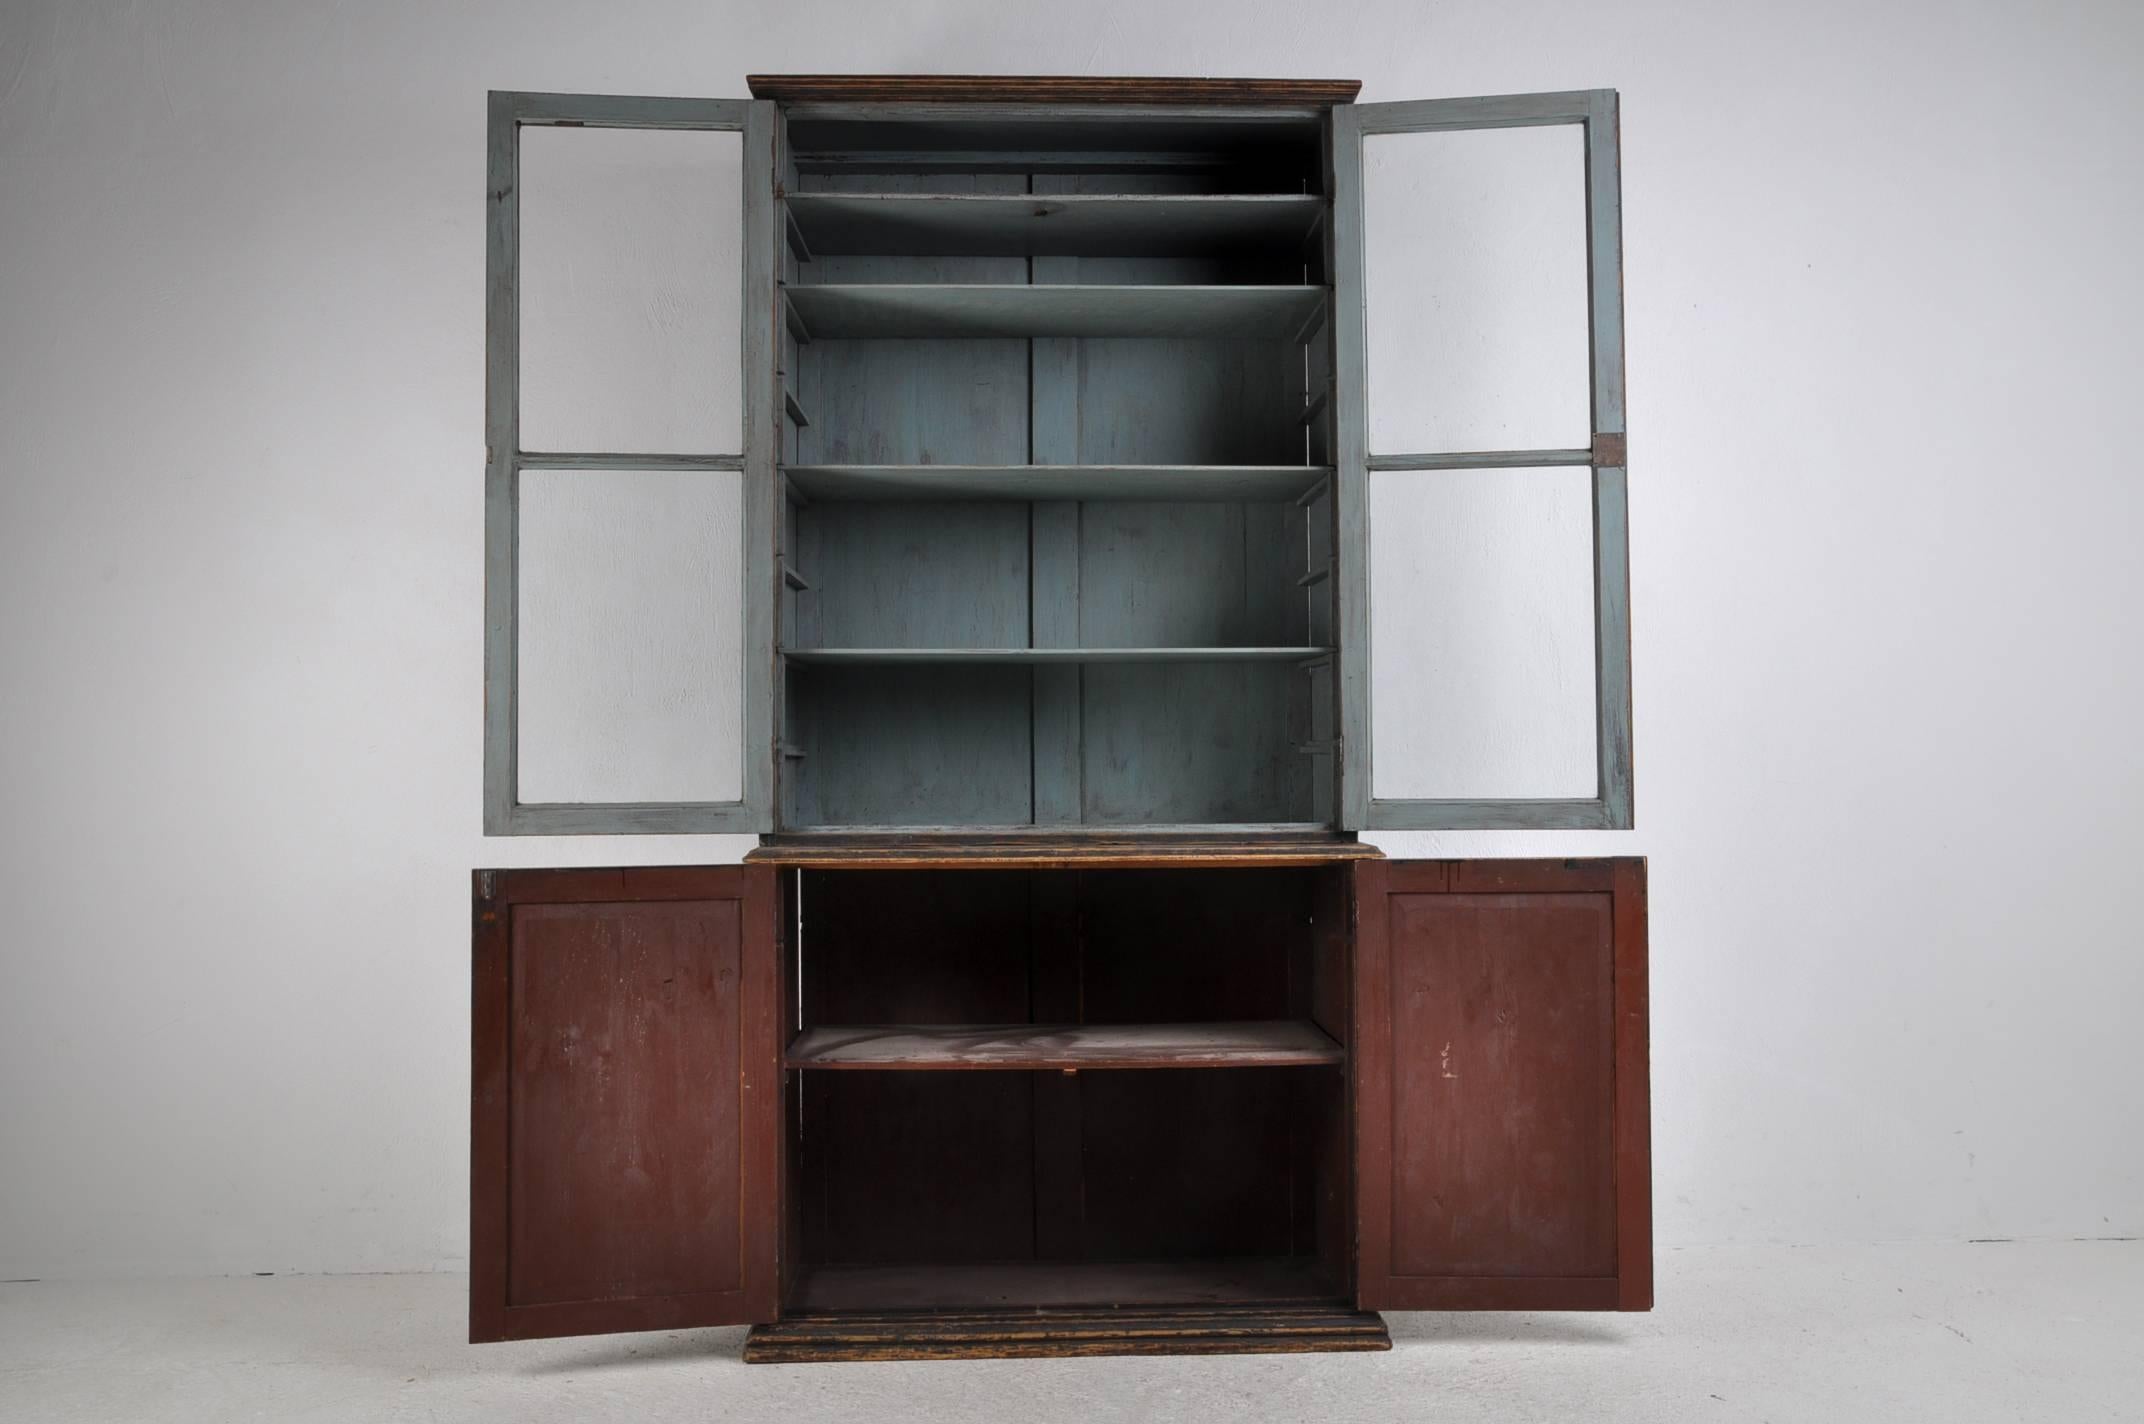 19th century black painted bookcase with original glasses and locks. Adjustable shelves.